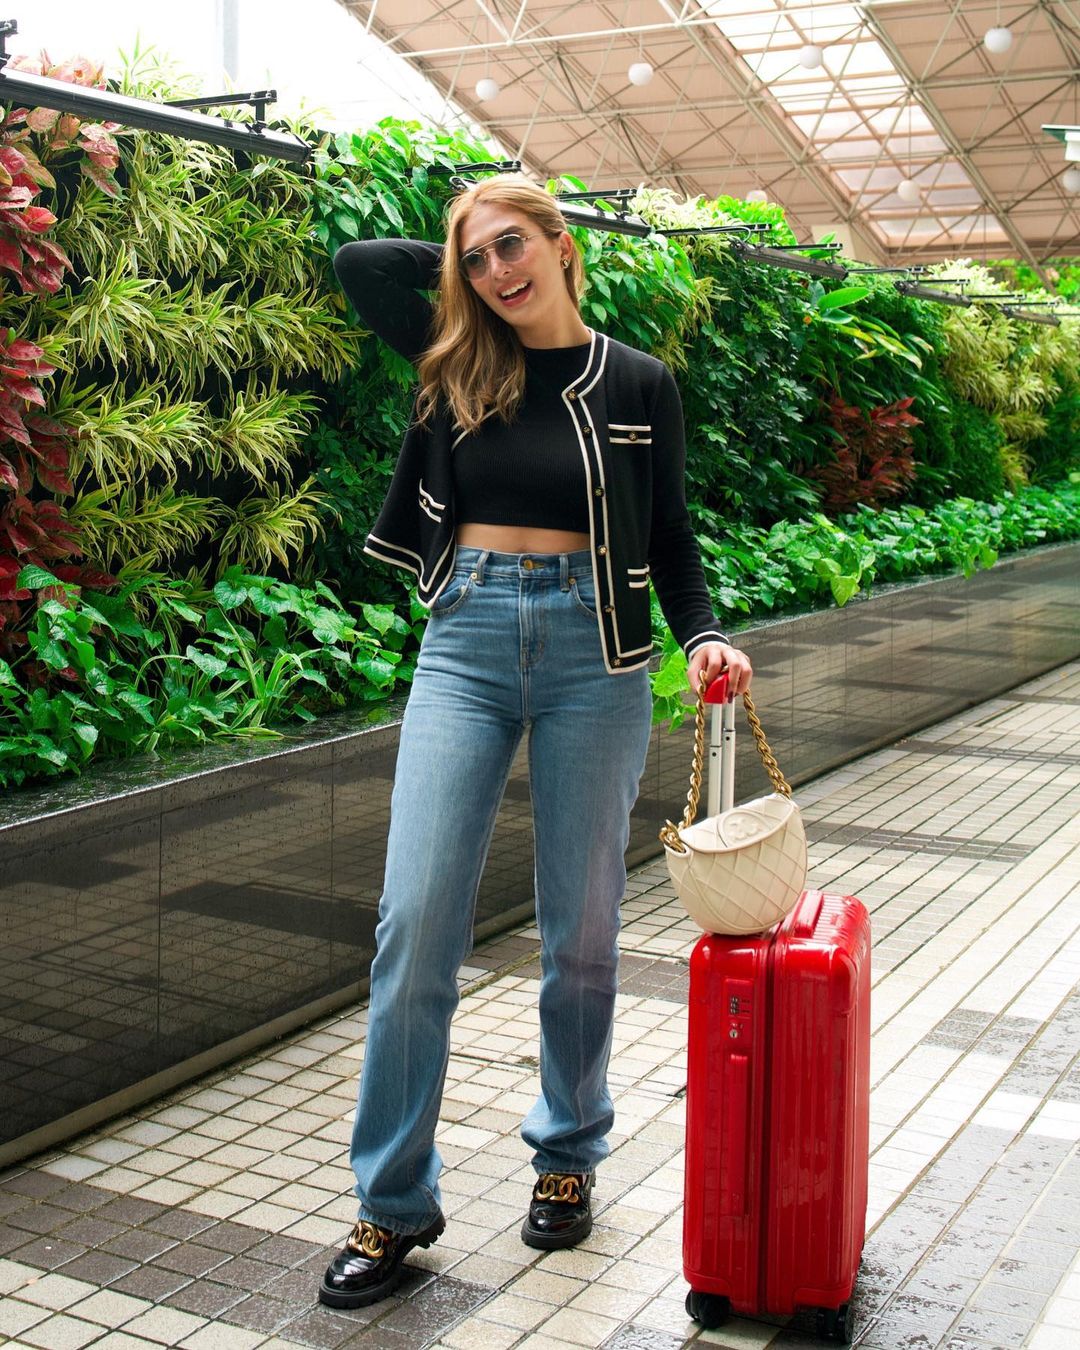 Look: Sofia Andres' Travel Outfits In Singapore Wearing Tory Burch